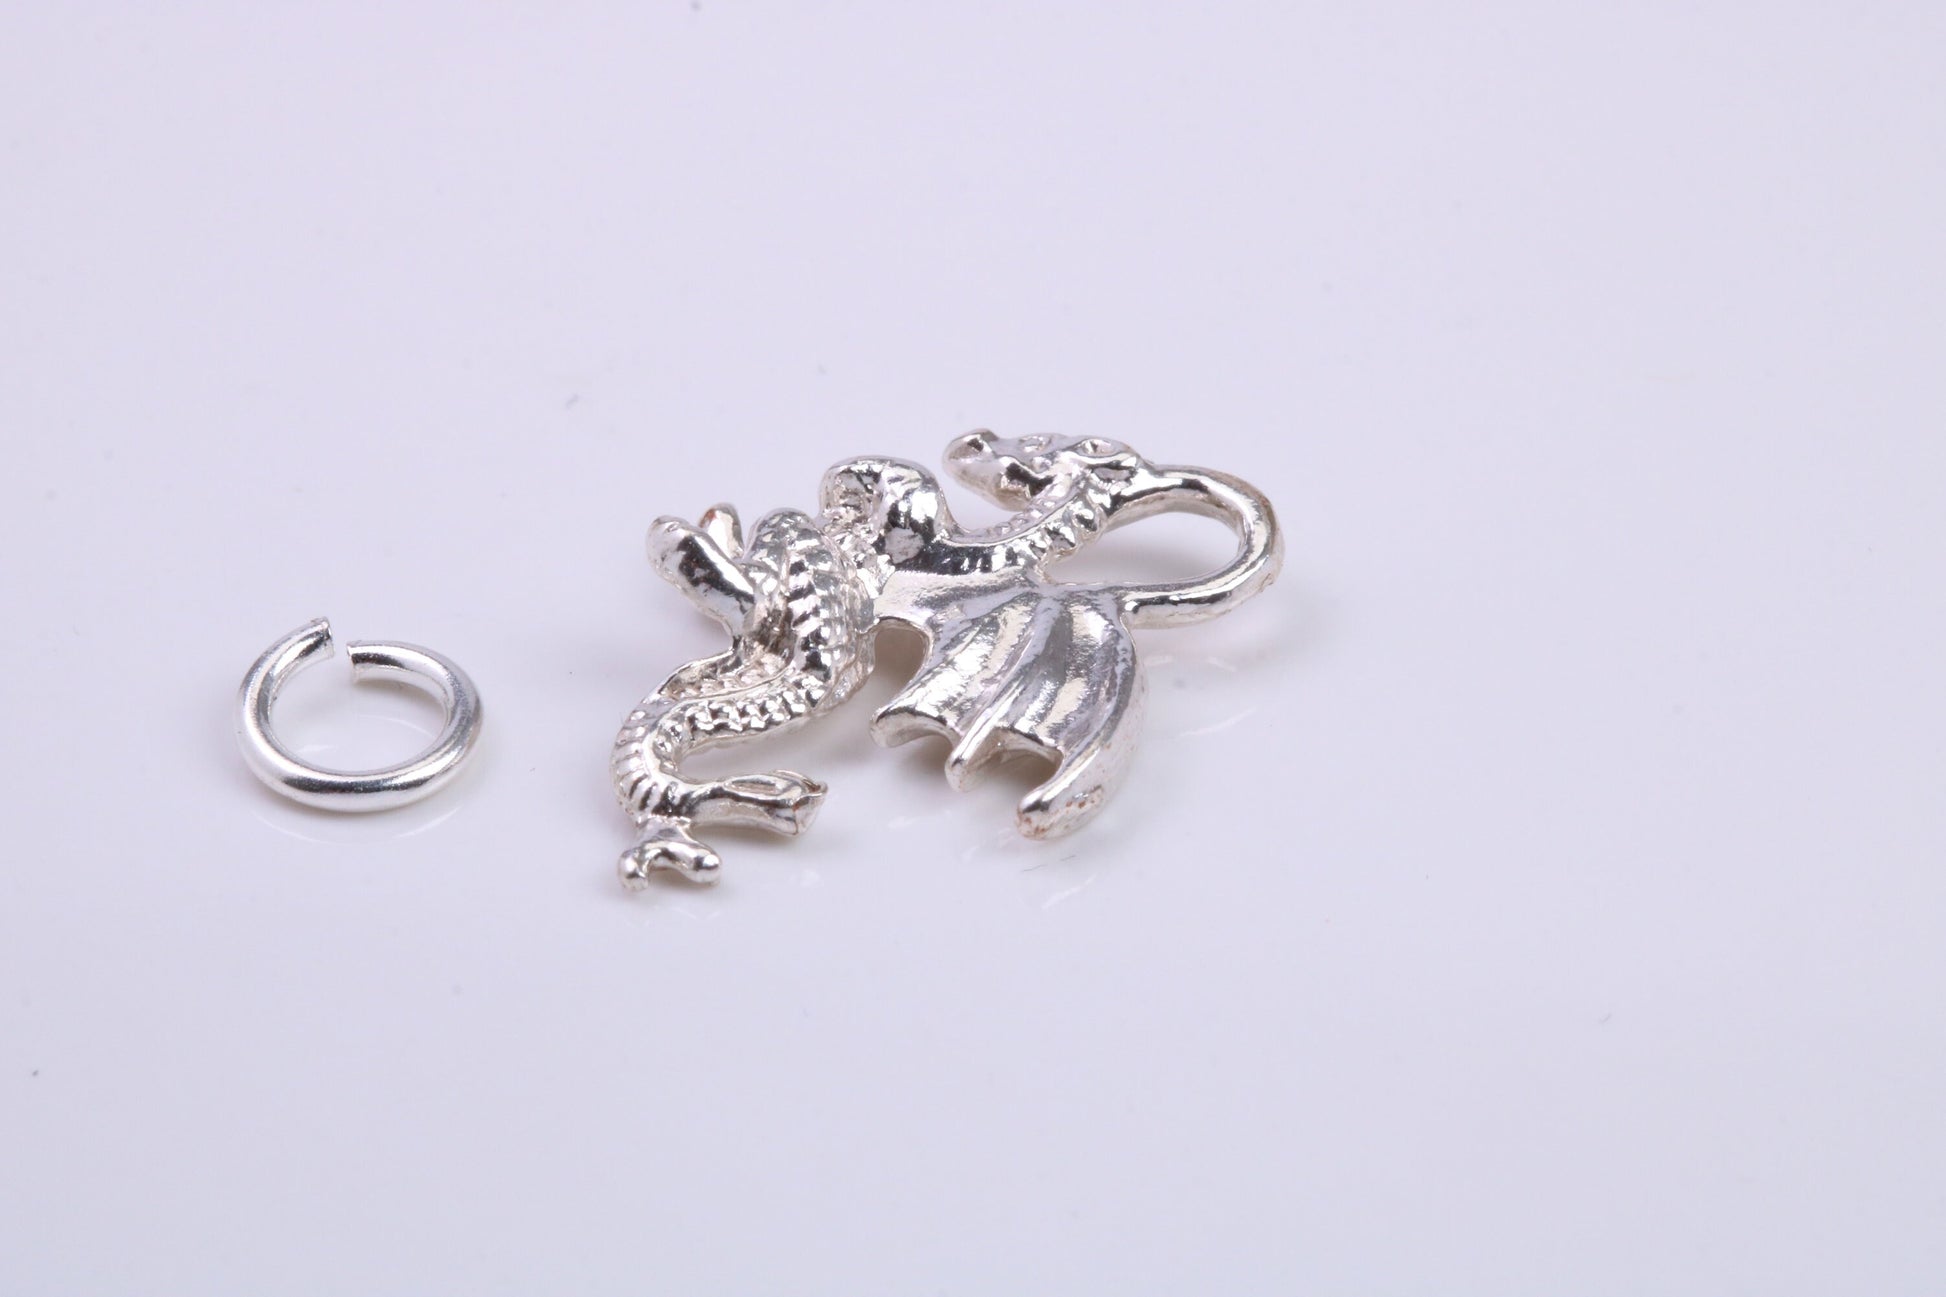 Dragon Charm, Traditional Charm, Made from Solid 925 Grade Sterling Silver, Complete with Attachment Link